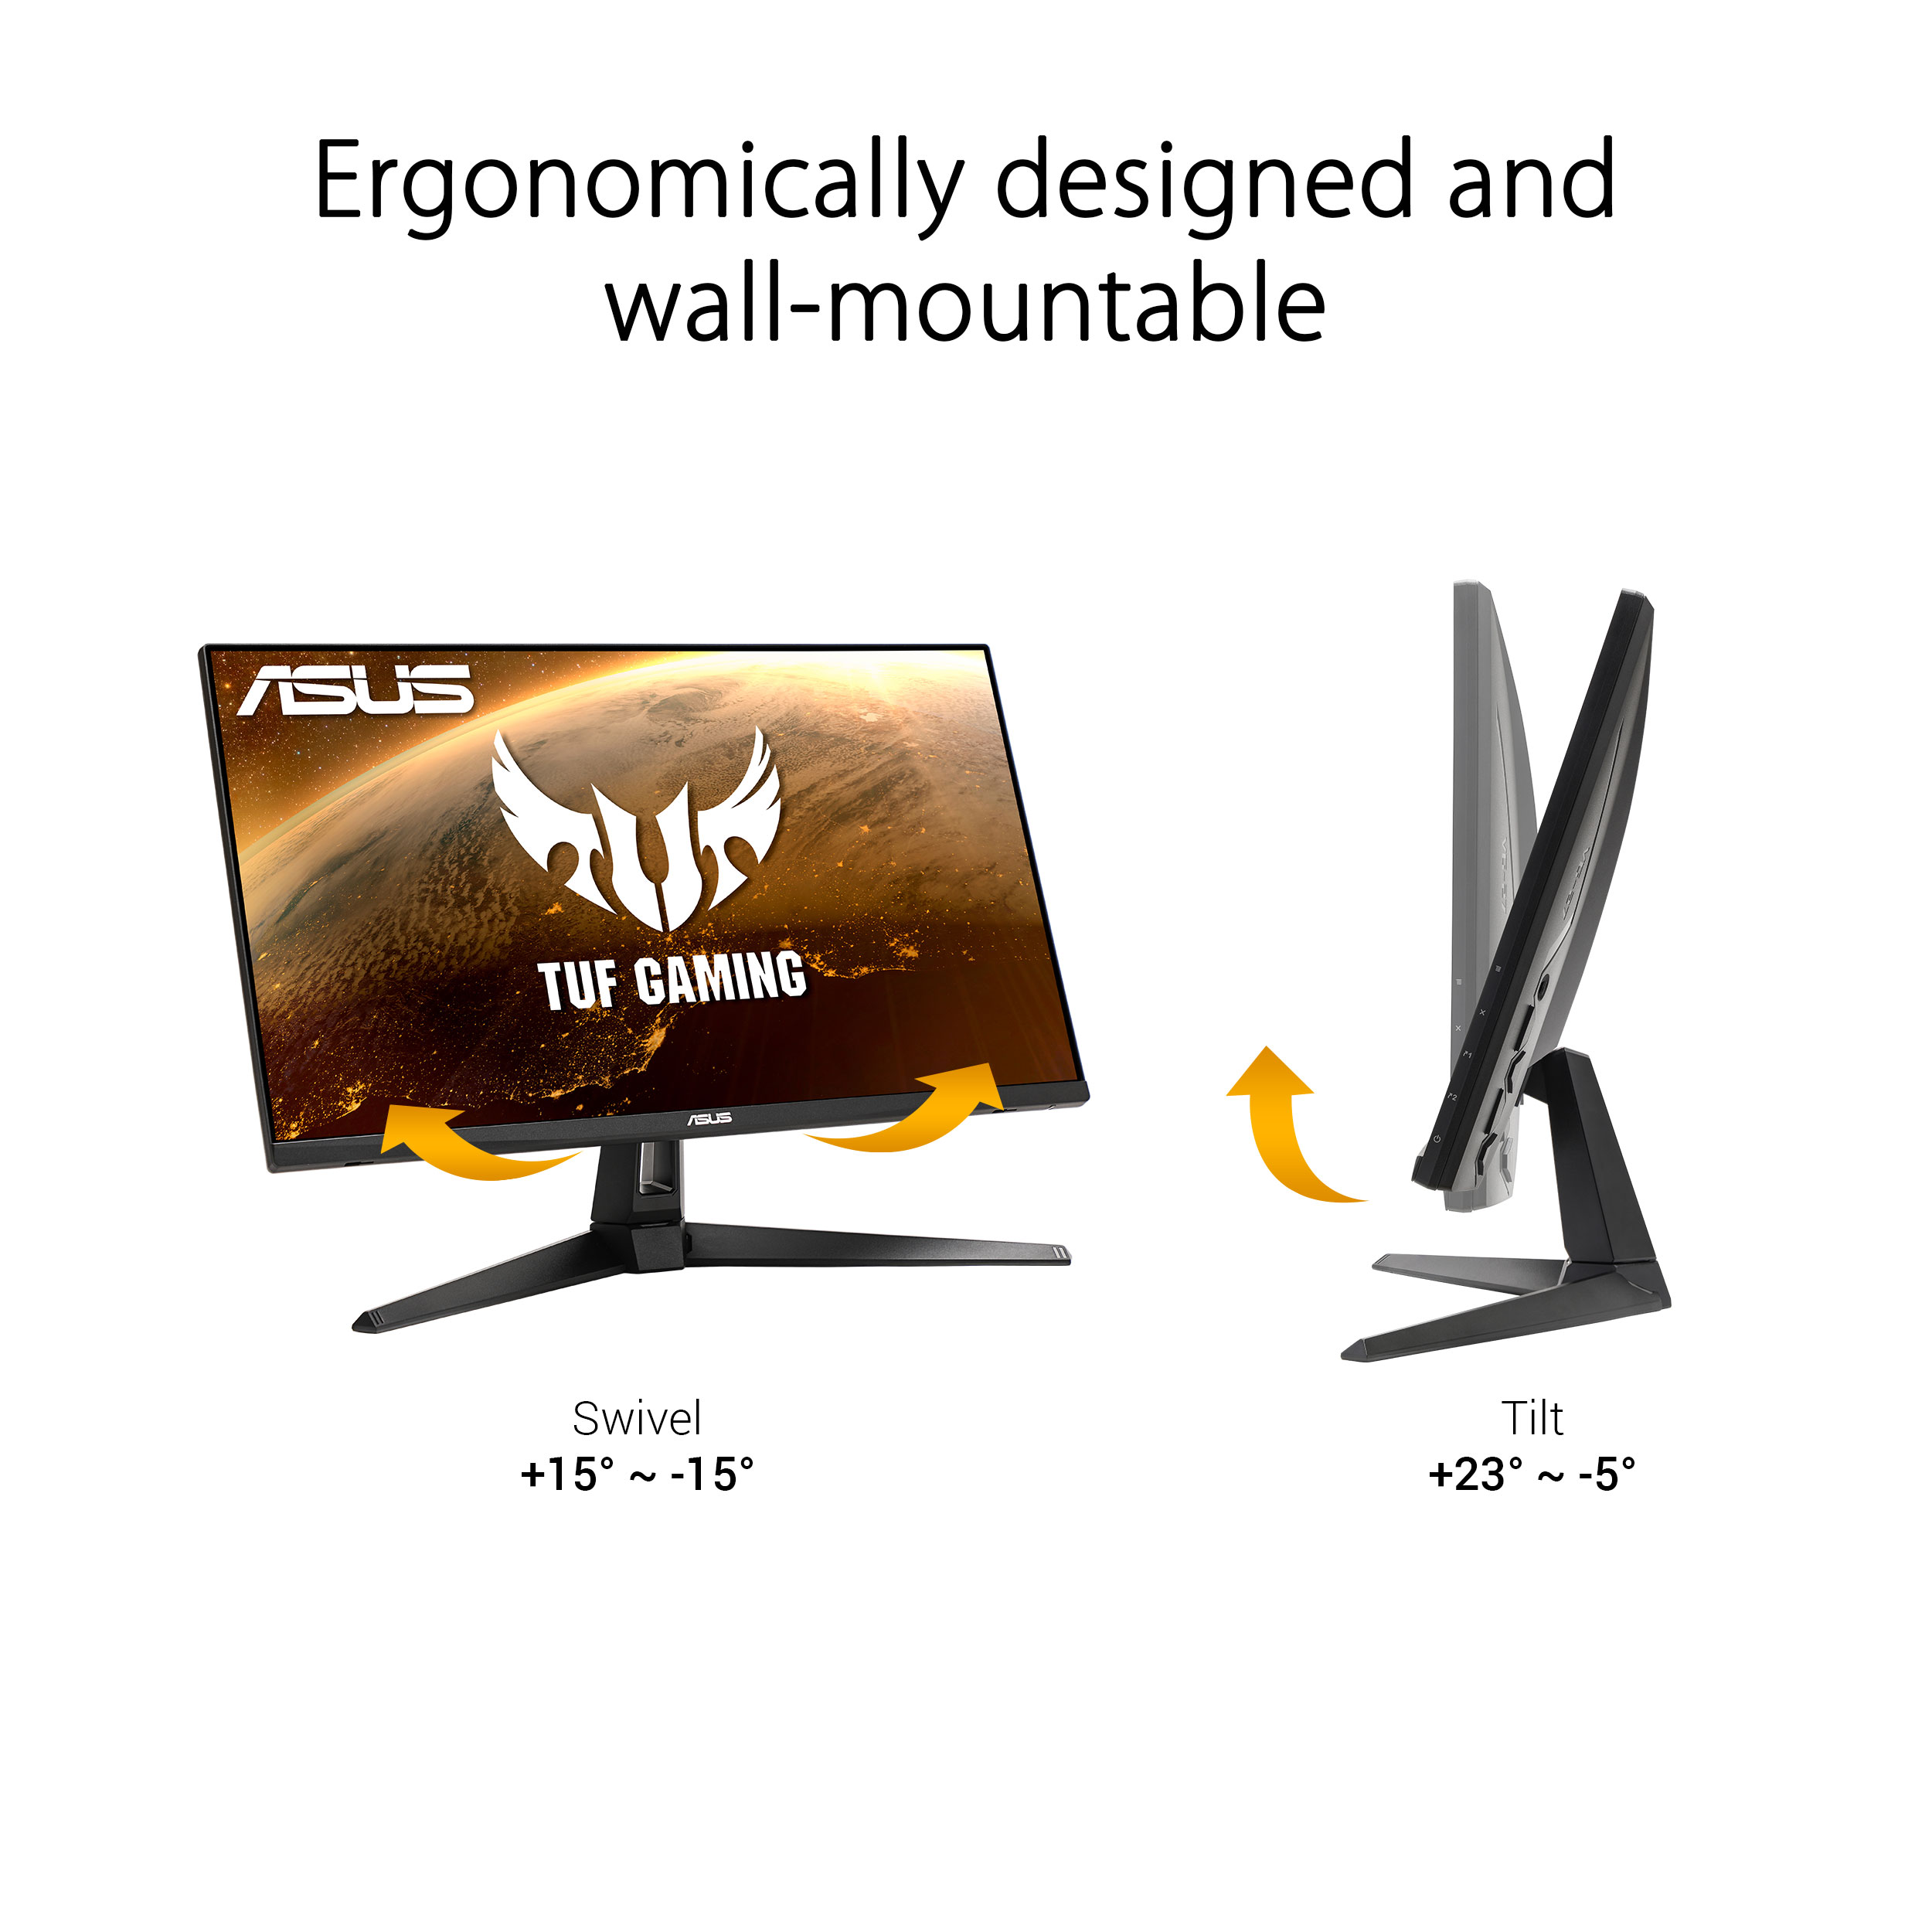 ASUS TUF Gaming 27” LED Gaming Monitor, 1080P Full HD, 165Hz (Supports 144Hz), IPS, 1ms - image 4 of 6